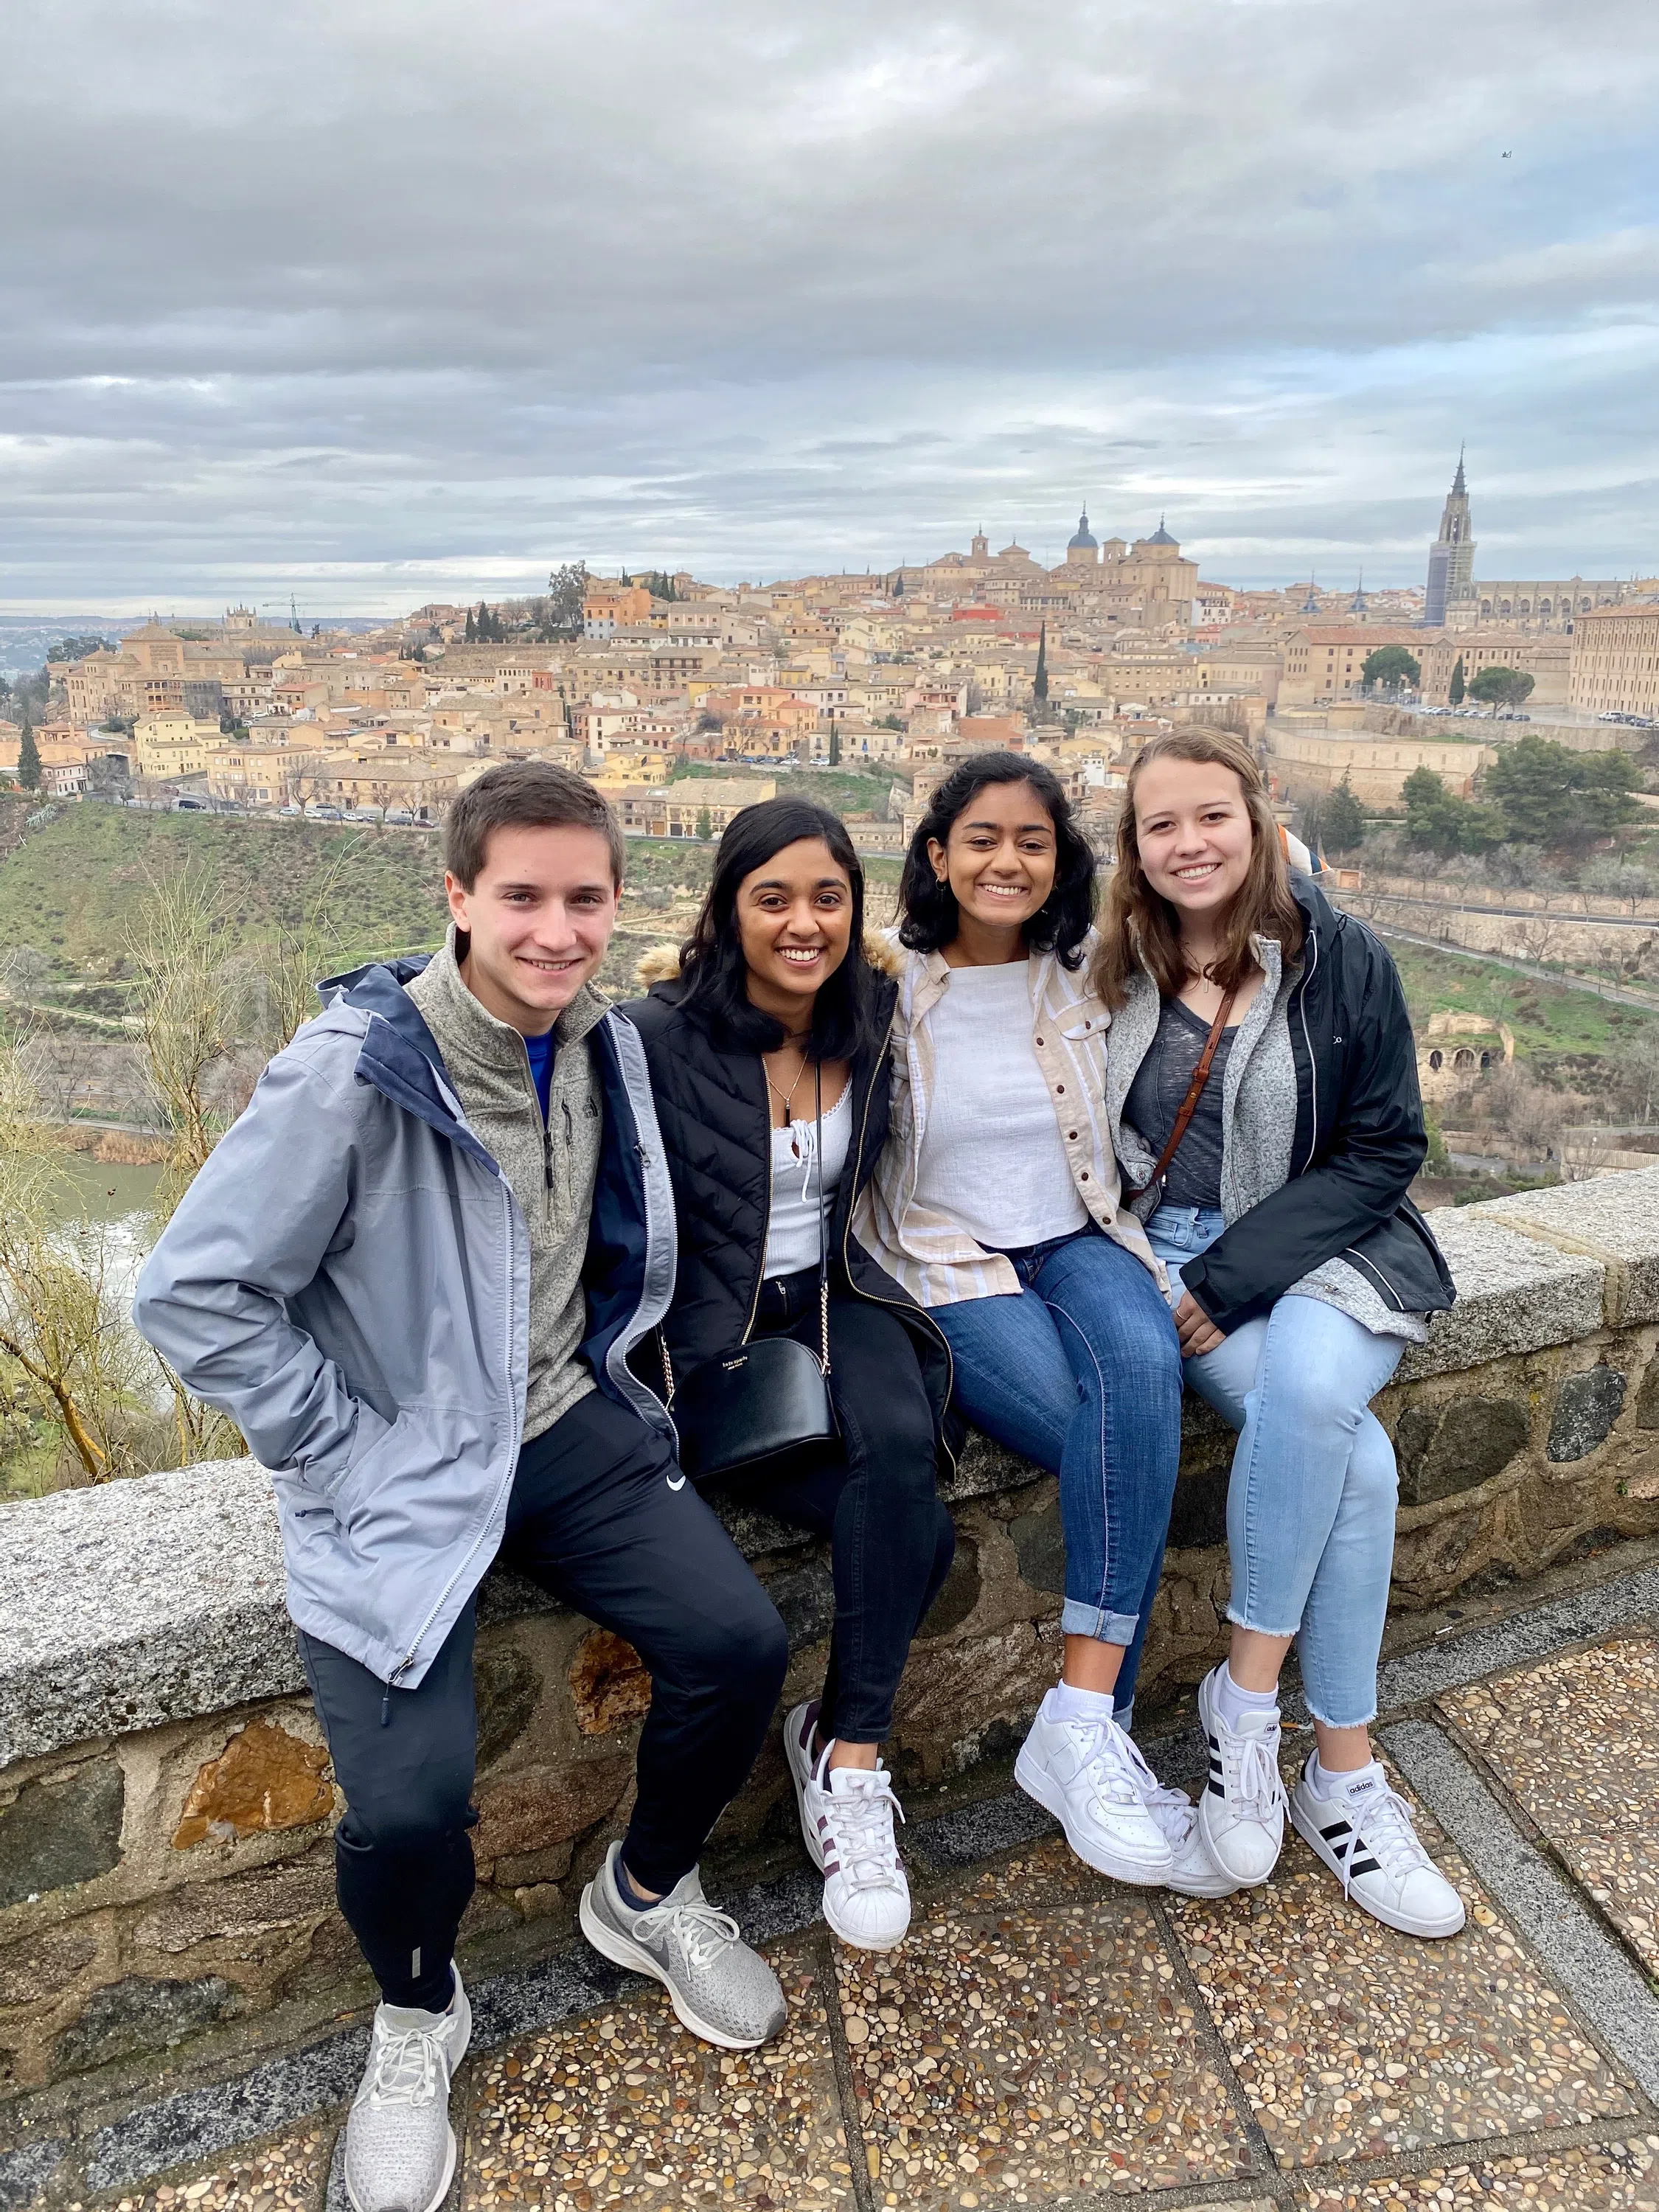 Four students sit on a ledge, which is overlooking an architectural scene in Toledo, Spain.